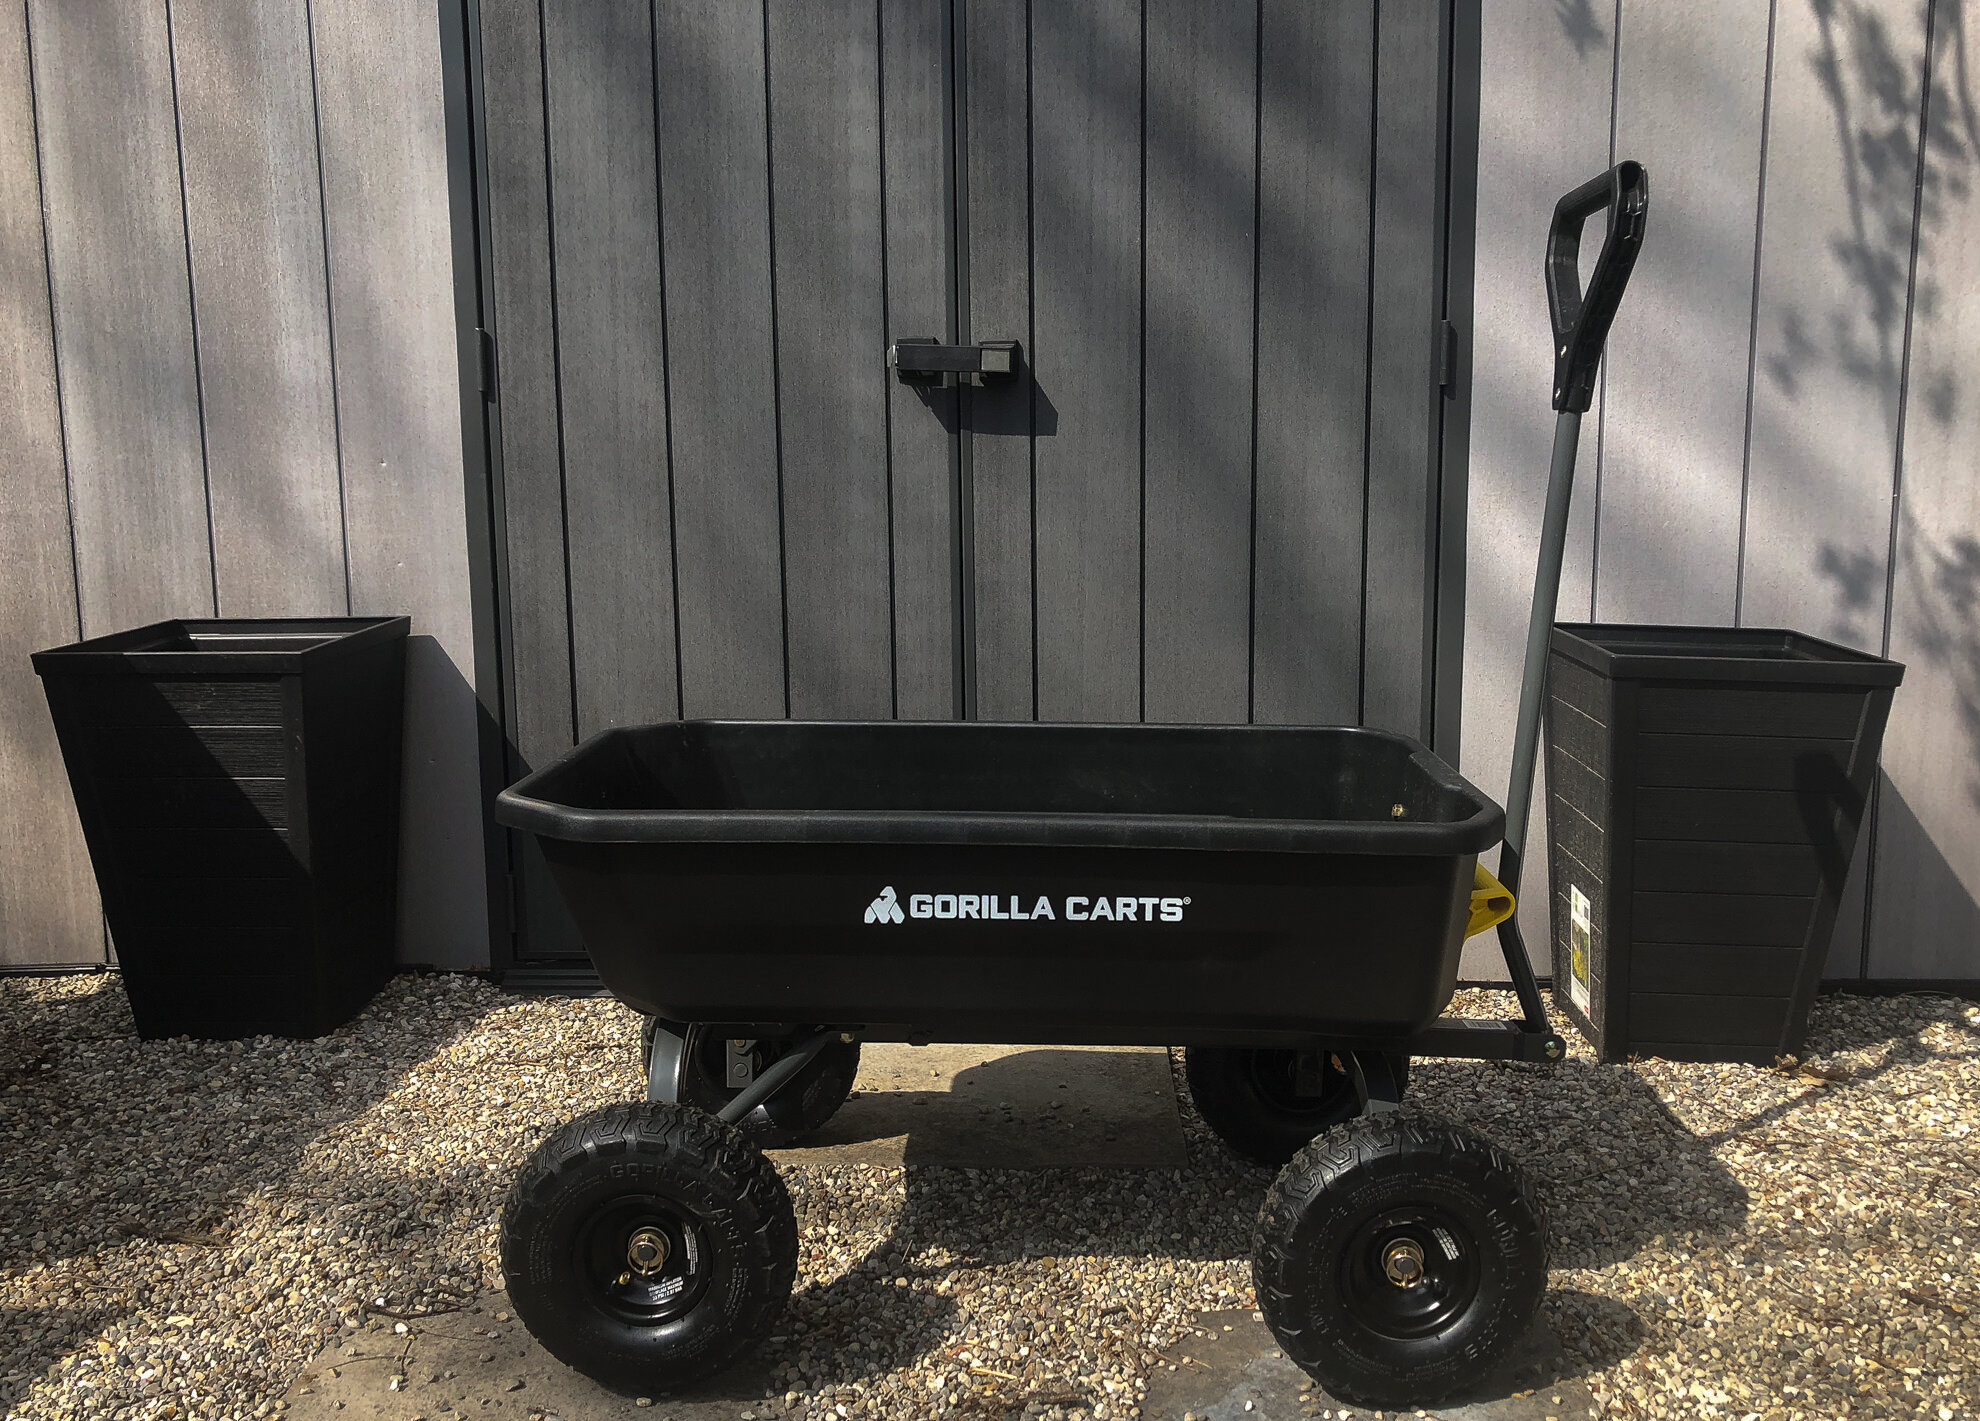 Our new Gorilla Cart holds 4 Cubic Ft. in its heavy-duty polycarbonate container that lifts up 180 degrees to dump its load. Notice the 10-inch pneumatic tires that can roll over anything that gets in the way and makes the device a joy to use in tig…